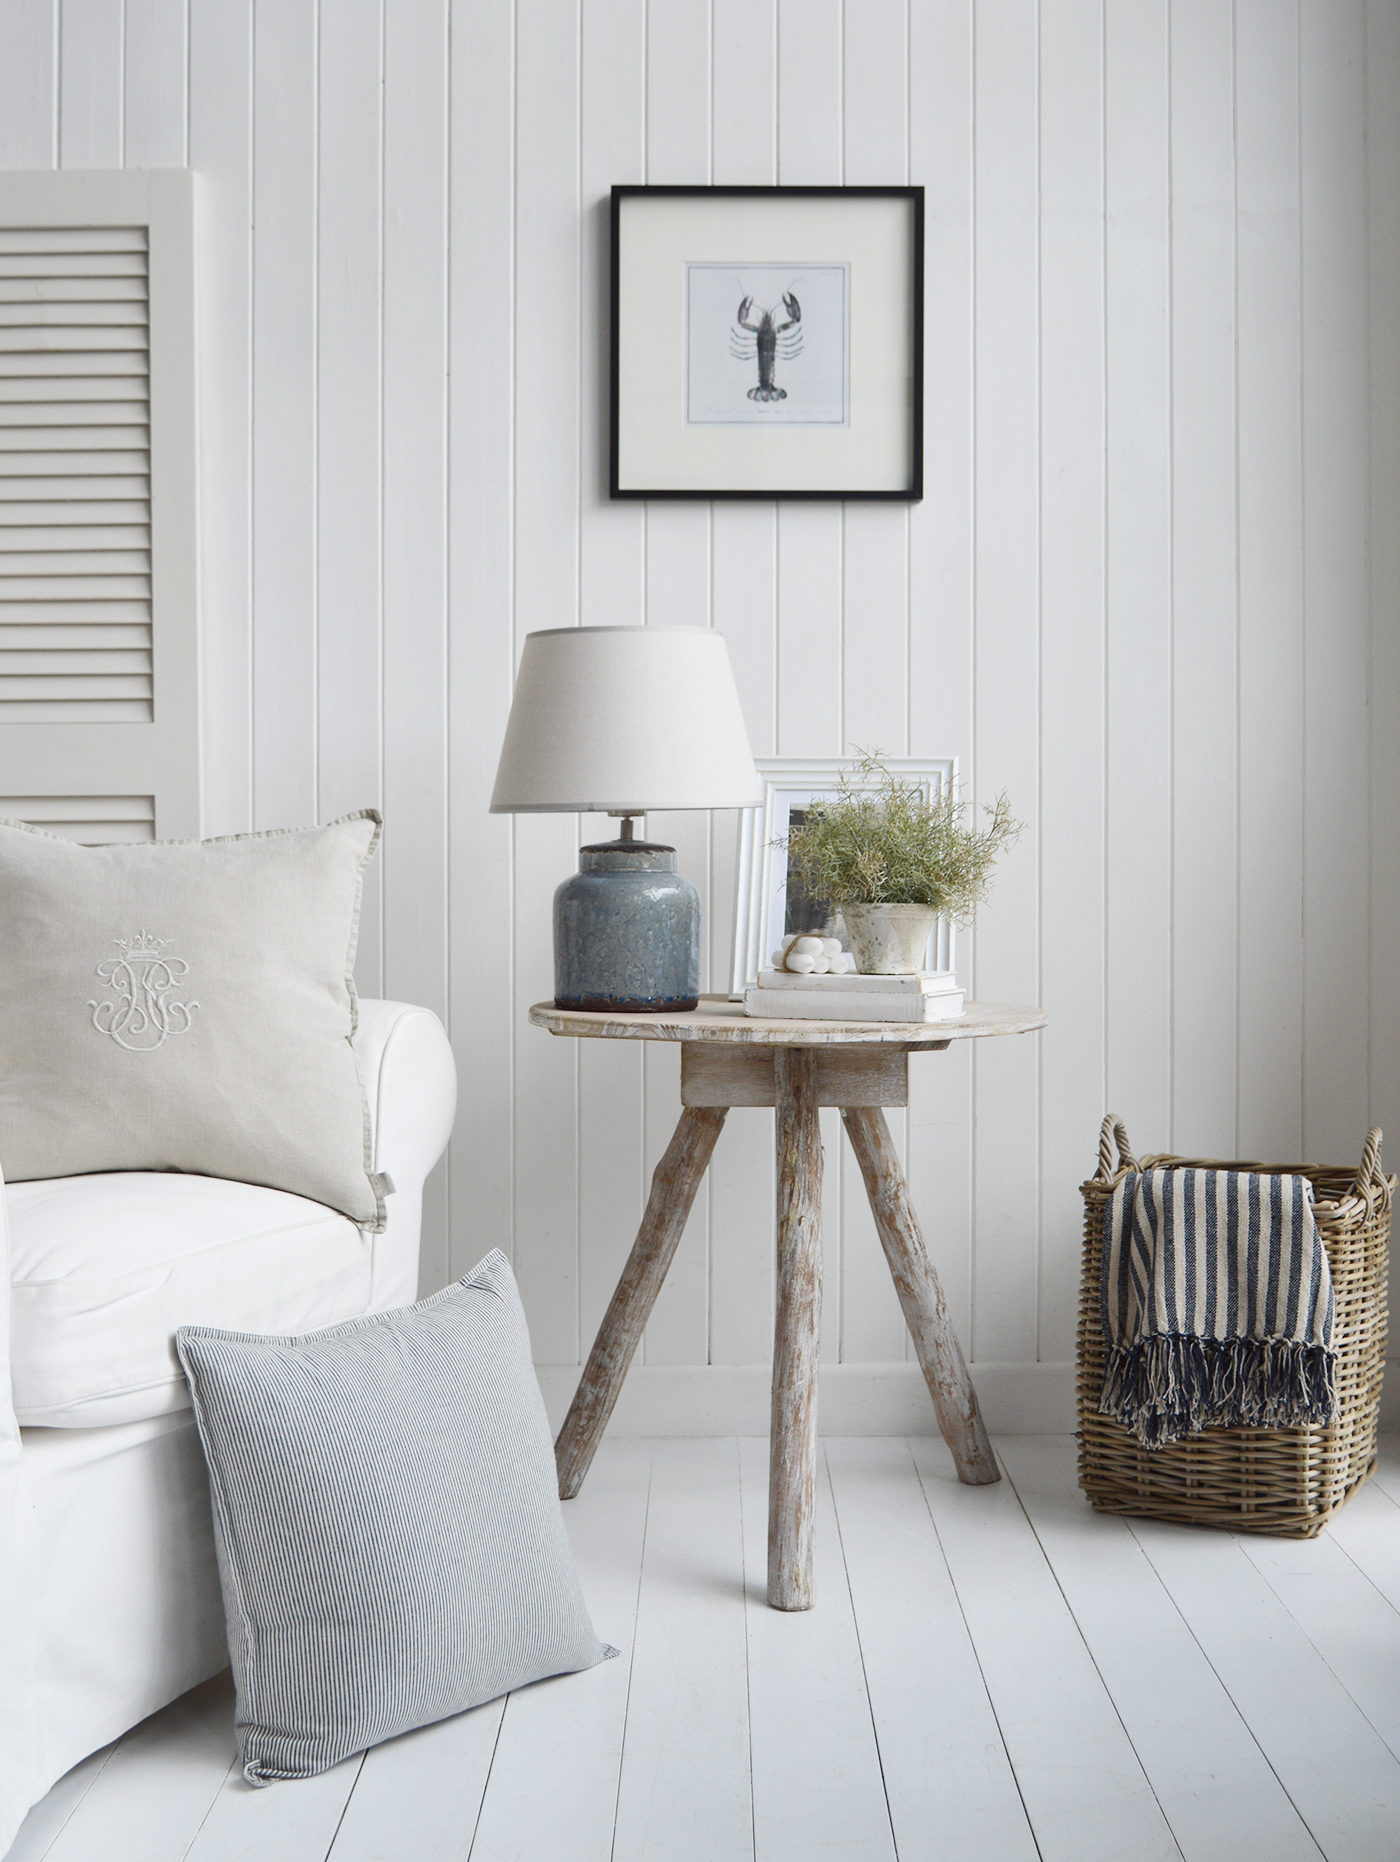 New England coastal interioes with hints of blue for a relaxed feel.